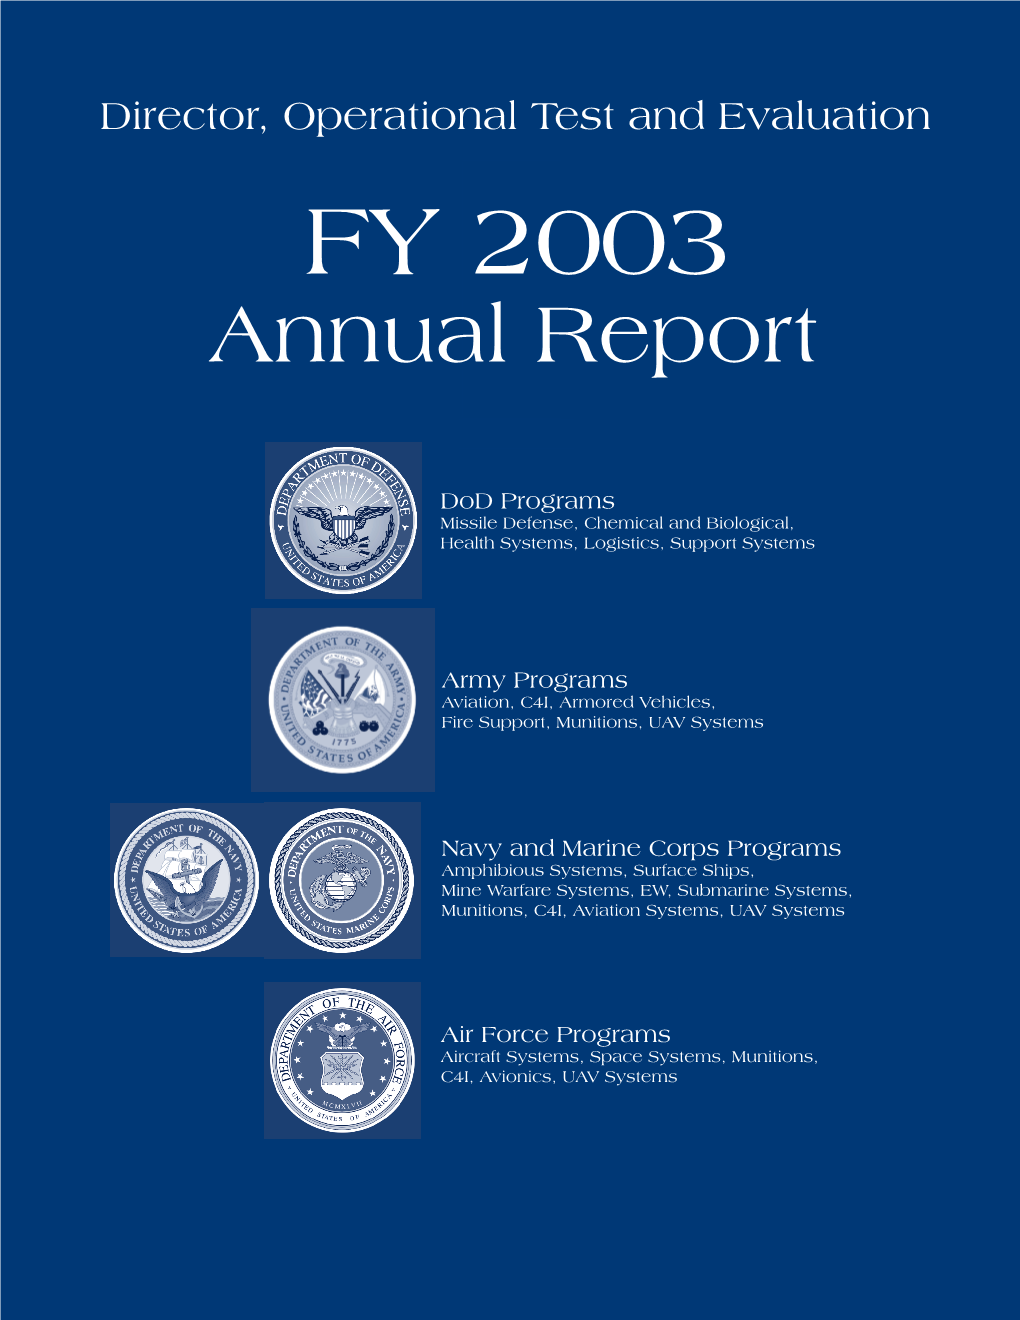 FY2003 Report for the Office of the Director